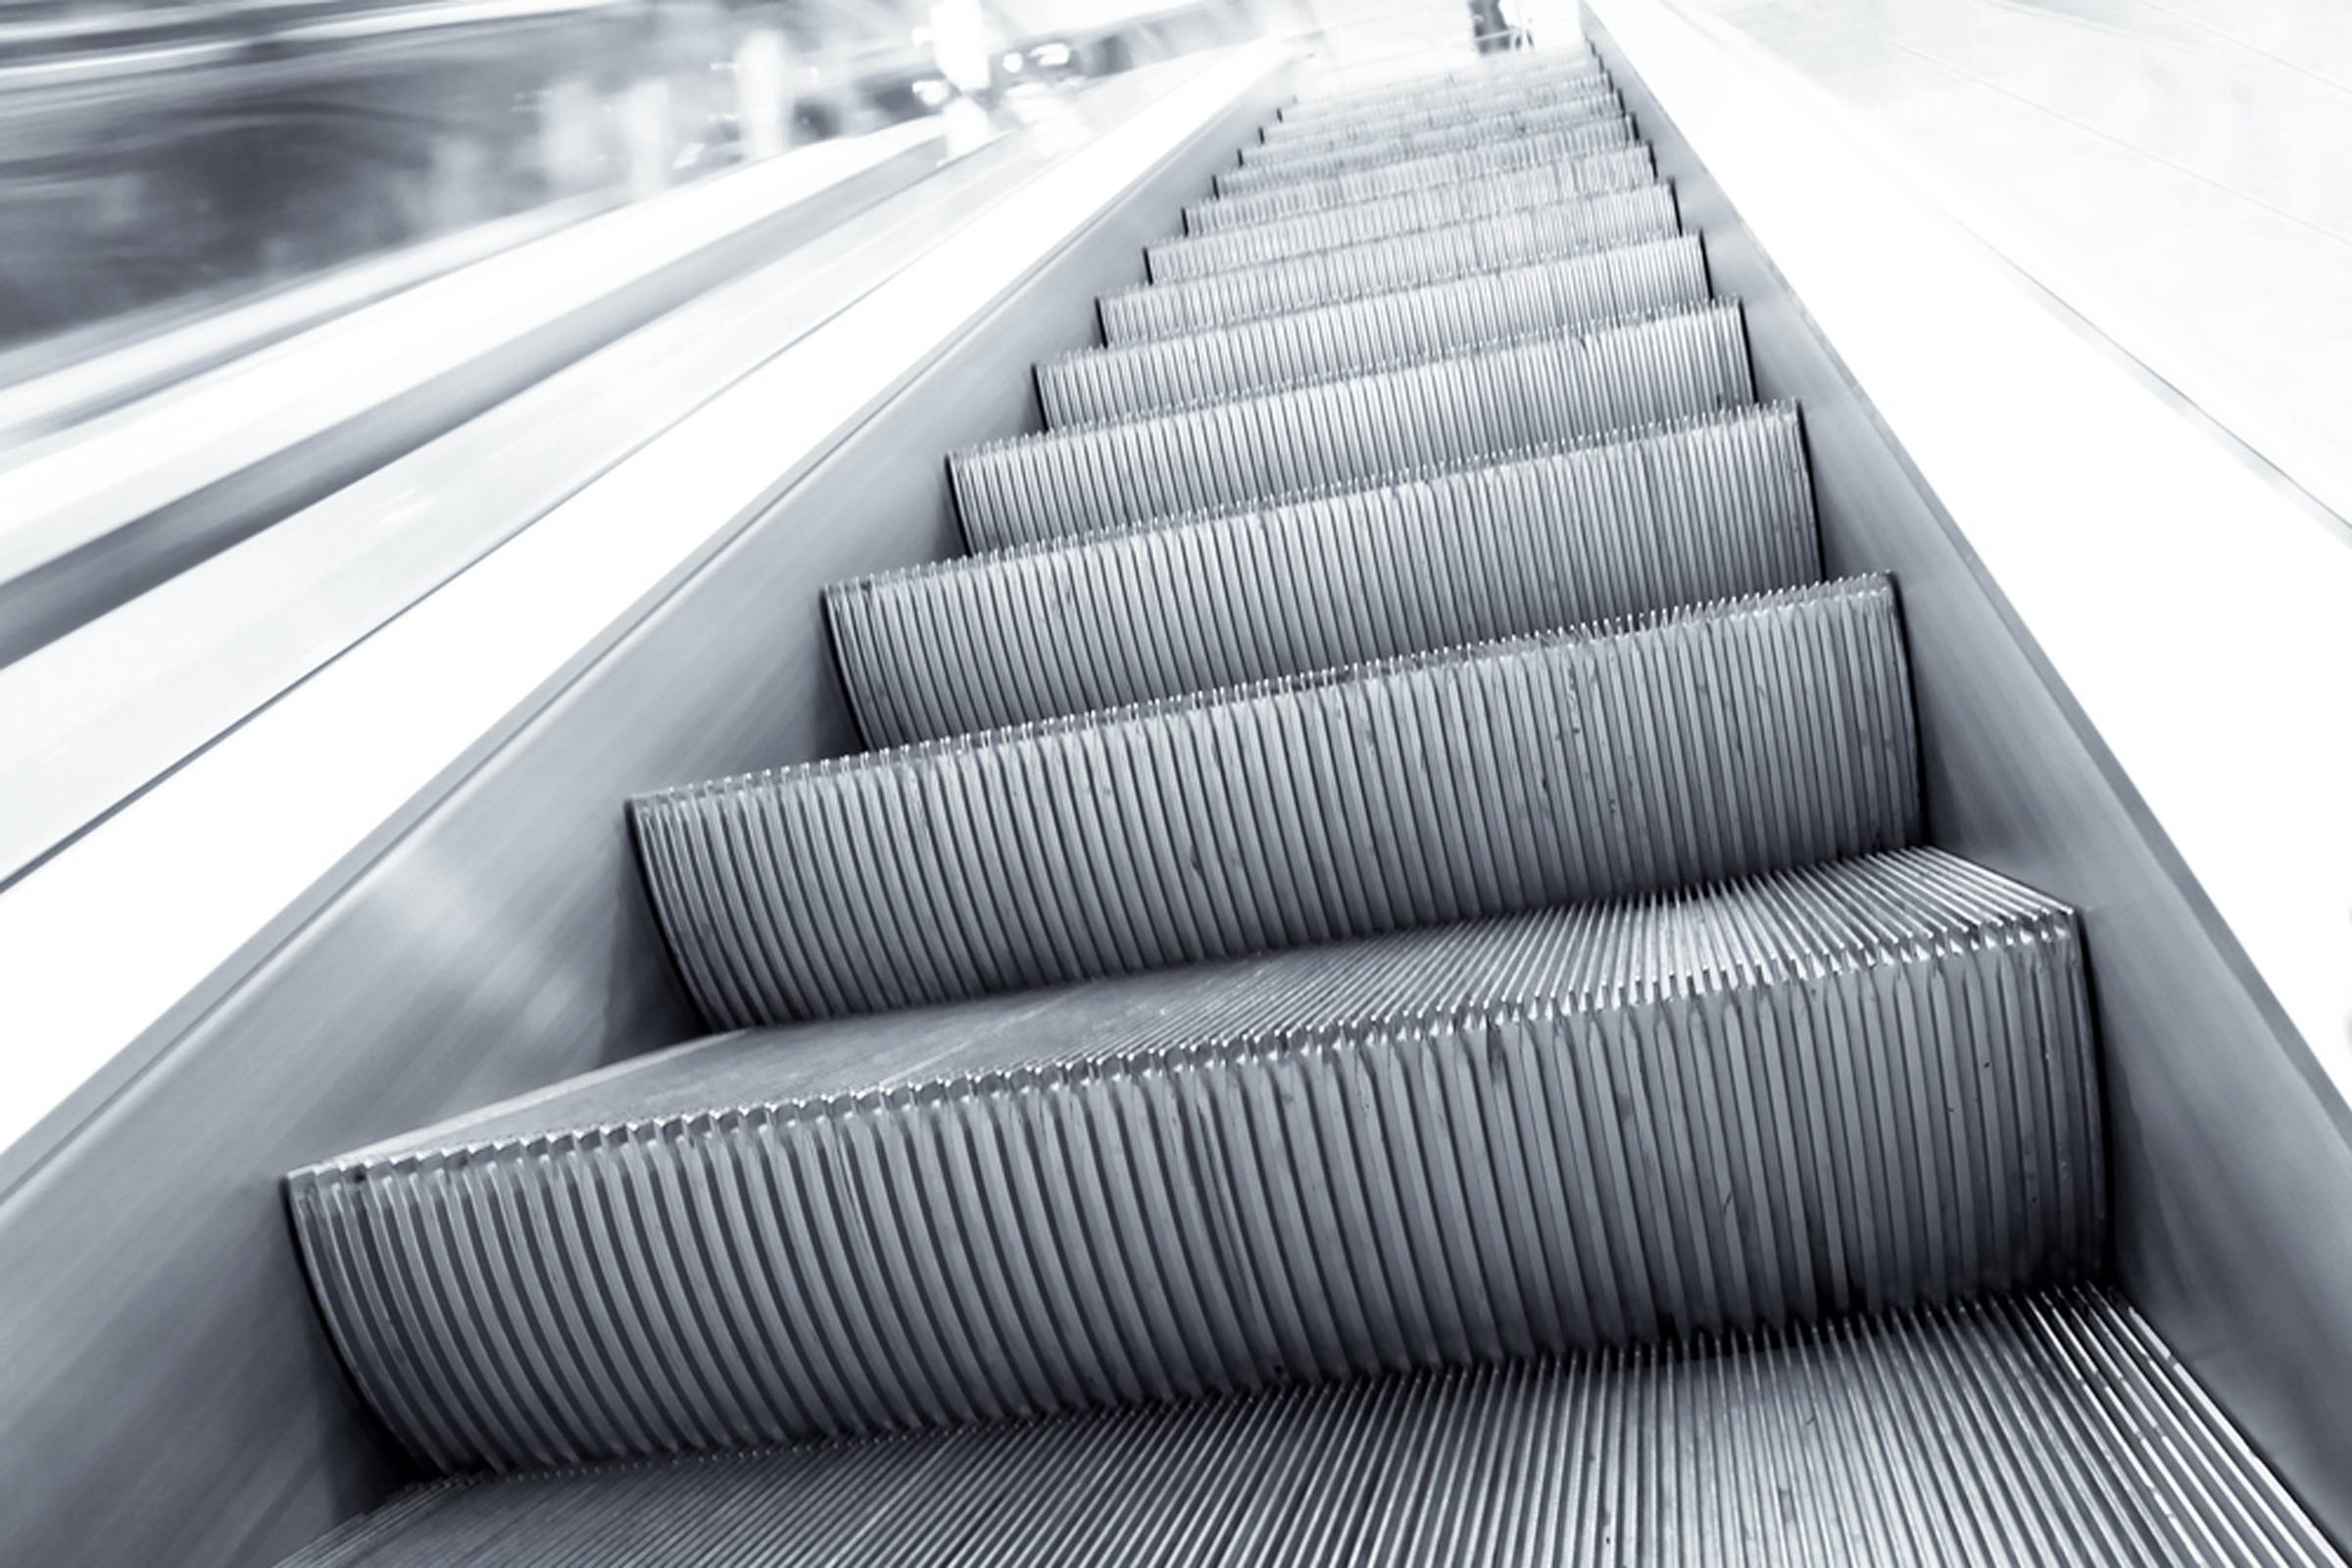 The Real Reason Why Escalator Stairs Have Grooves | Reader's Digest